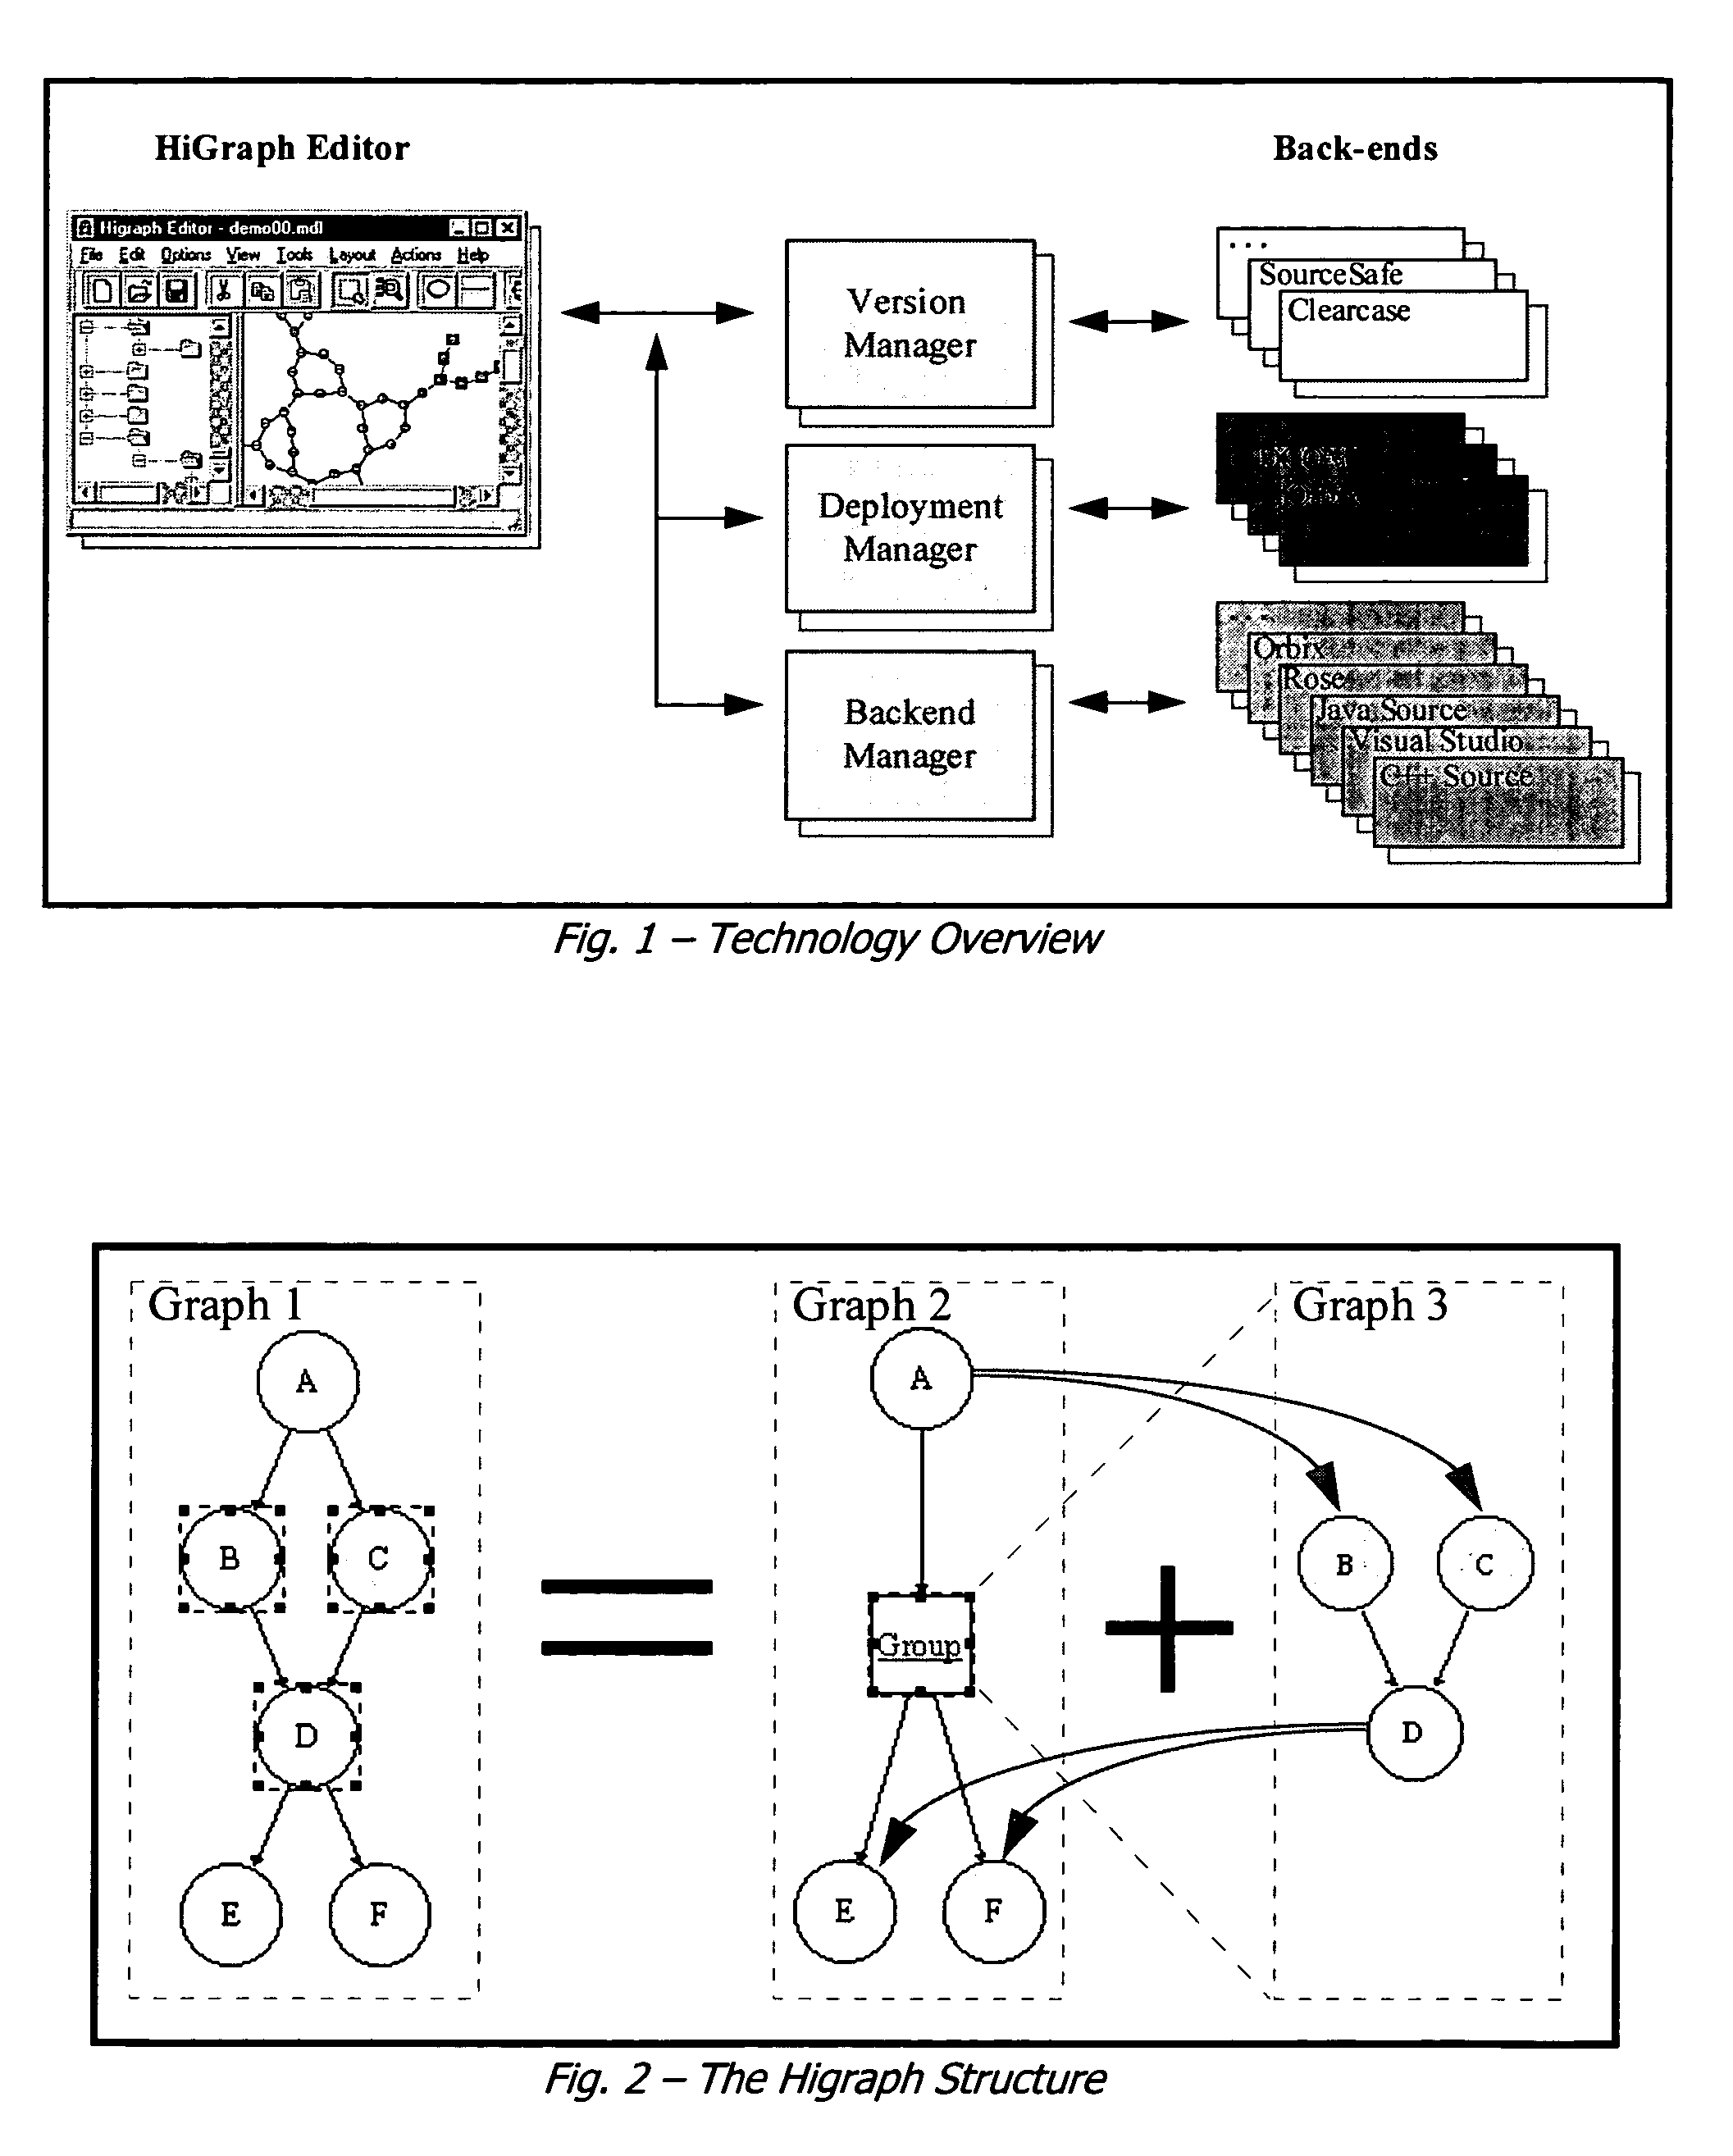 System and method for computer-aided graph-based dependency analysis